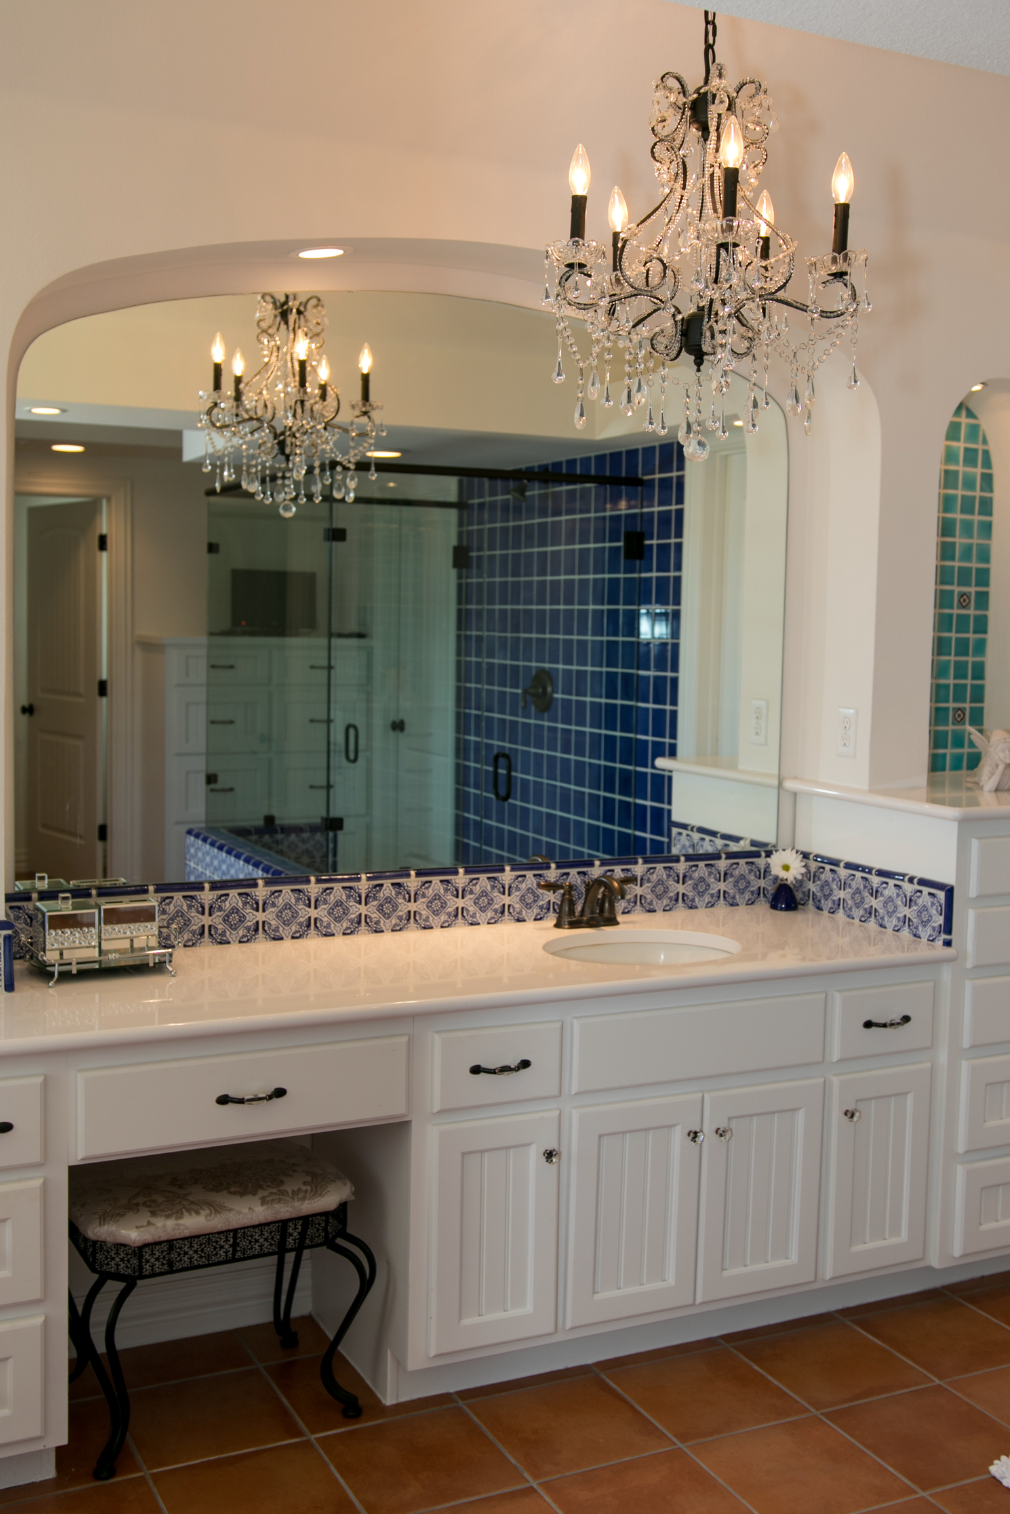 A bathroom with a large mirror and a chandelier